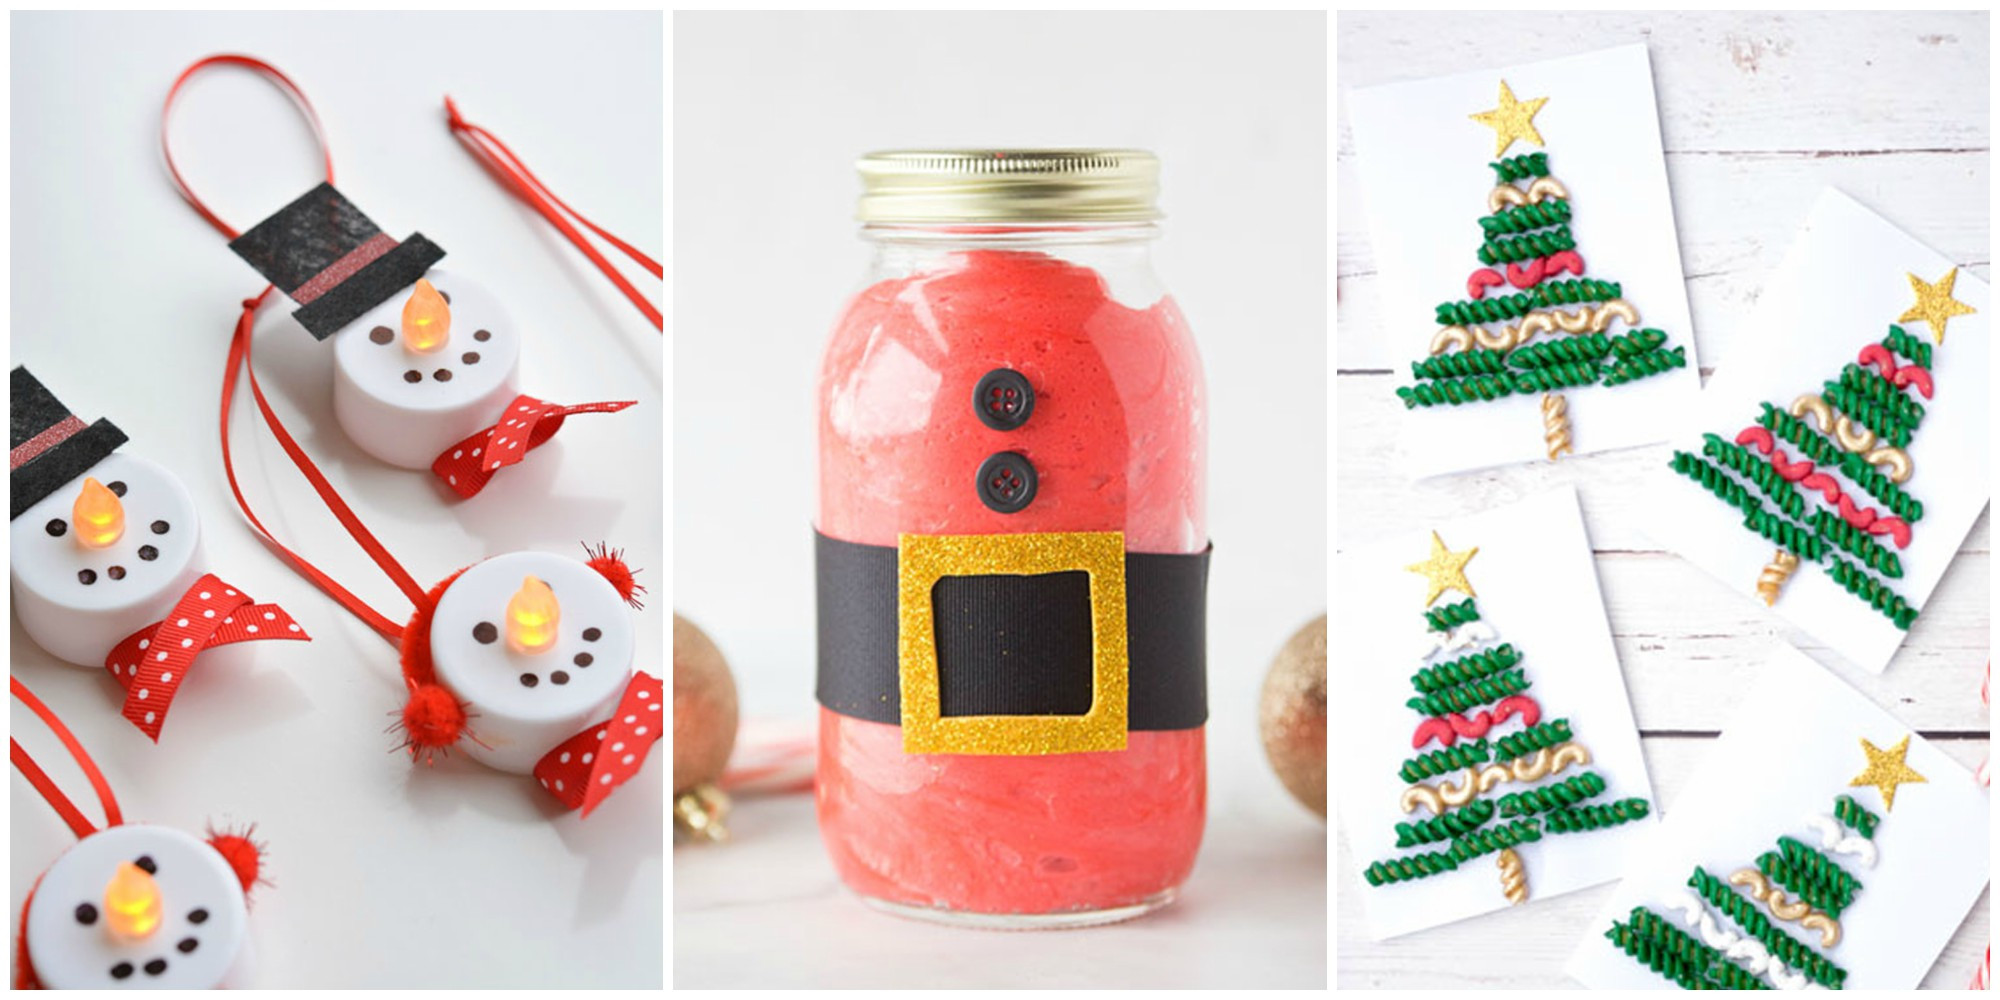 Simple Christmas Crafts For Kids
 12 Easy Christmas Crafts For Kids to Make Ideas for